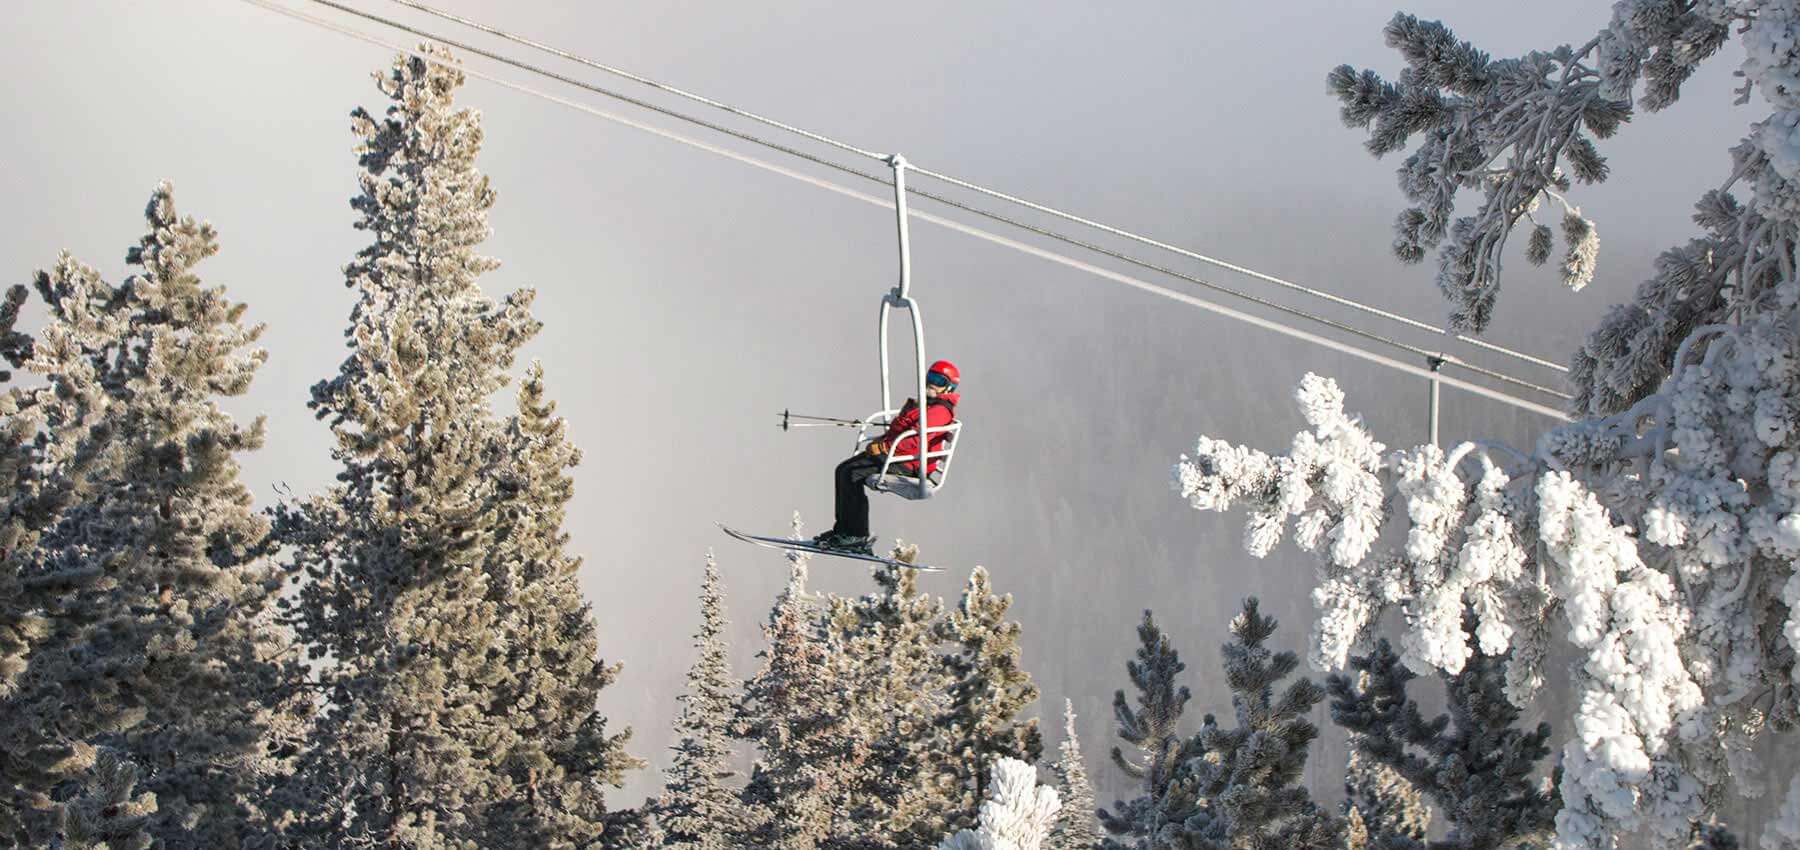 ski patrol riding the chairlift